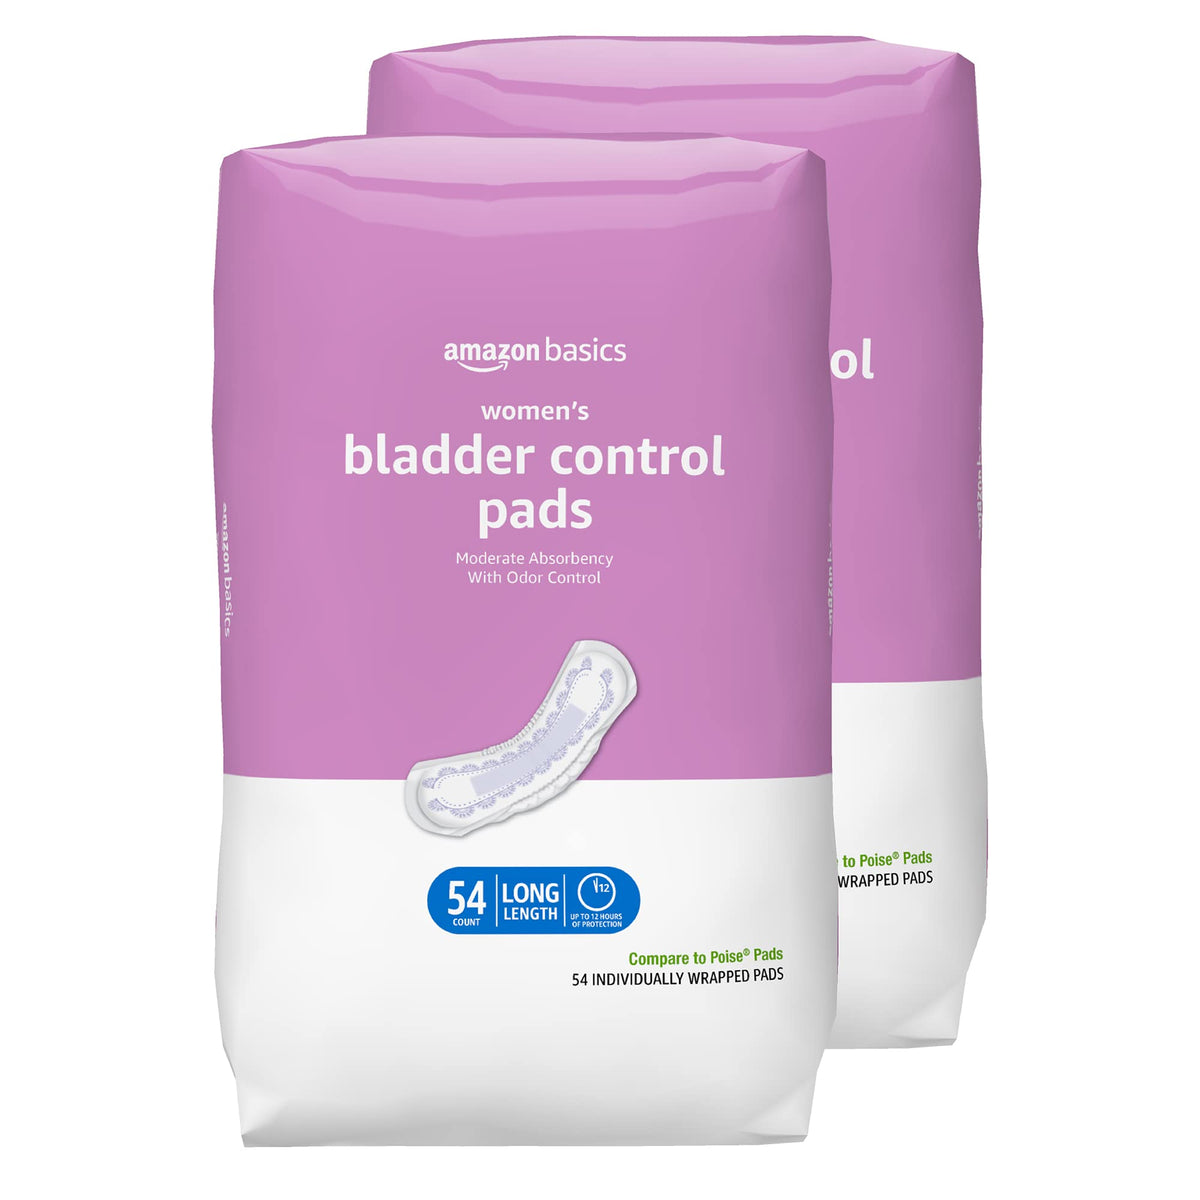 Amazon Basics Incontinence, Bladder Control Pads for Women, Moderate Absorbency, Long Length, 108 Count, 2 Packs of 54, White (Previously Solimo)